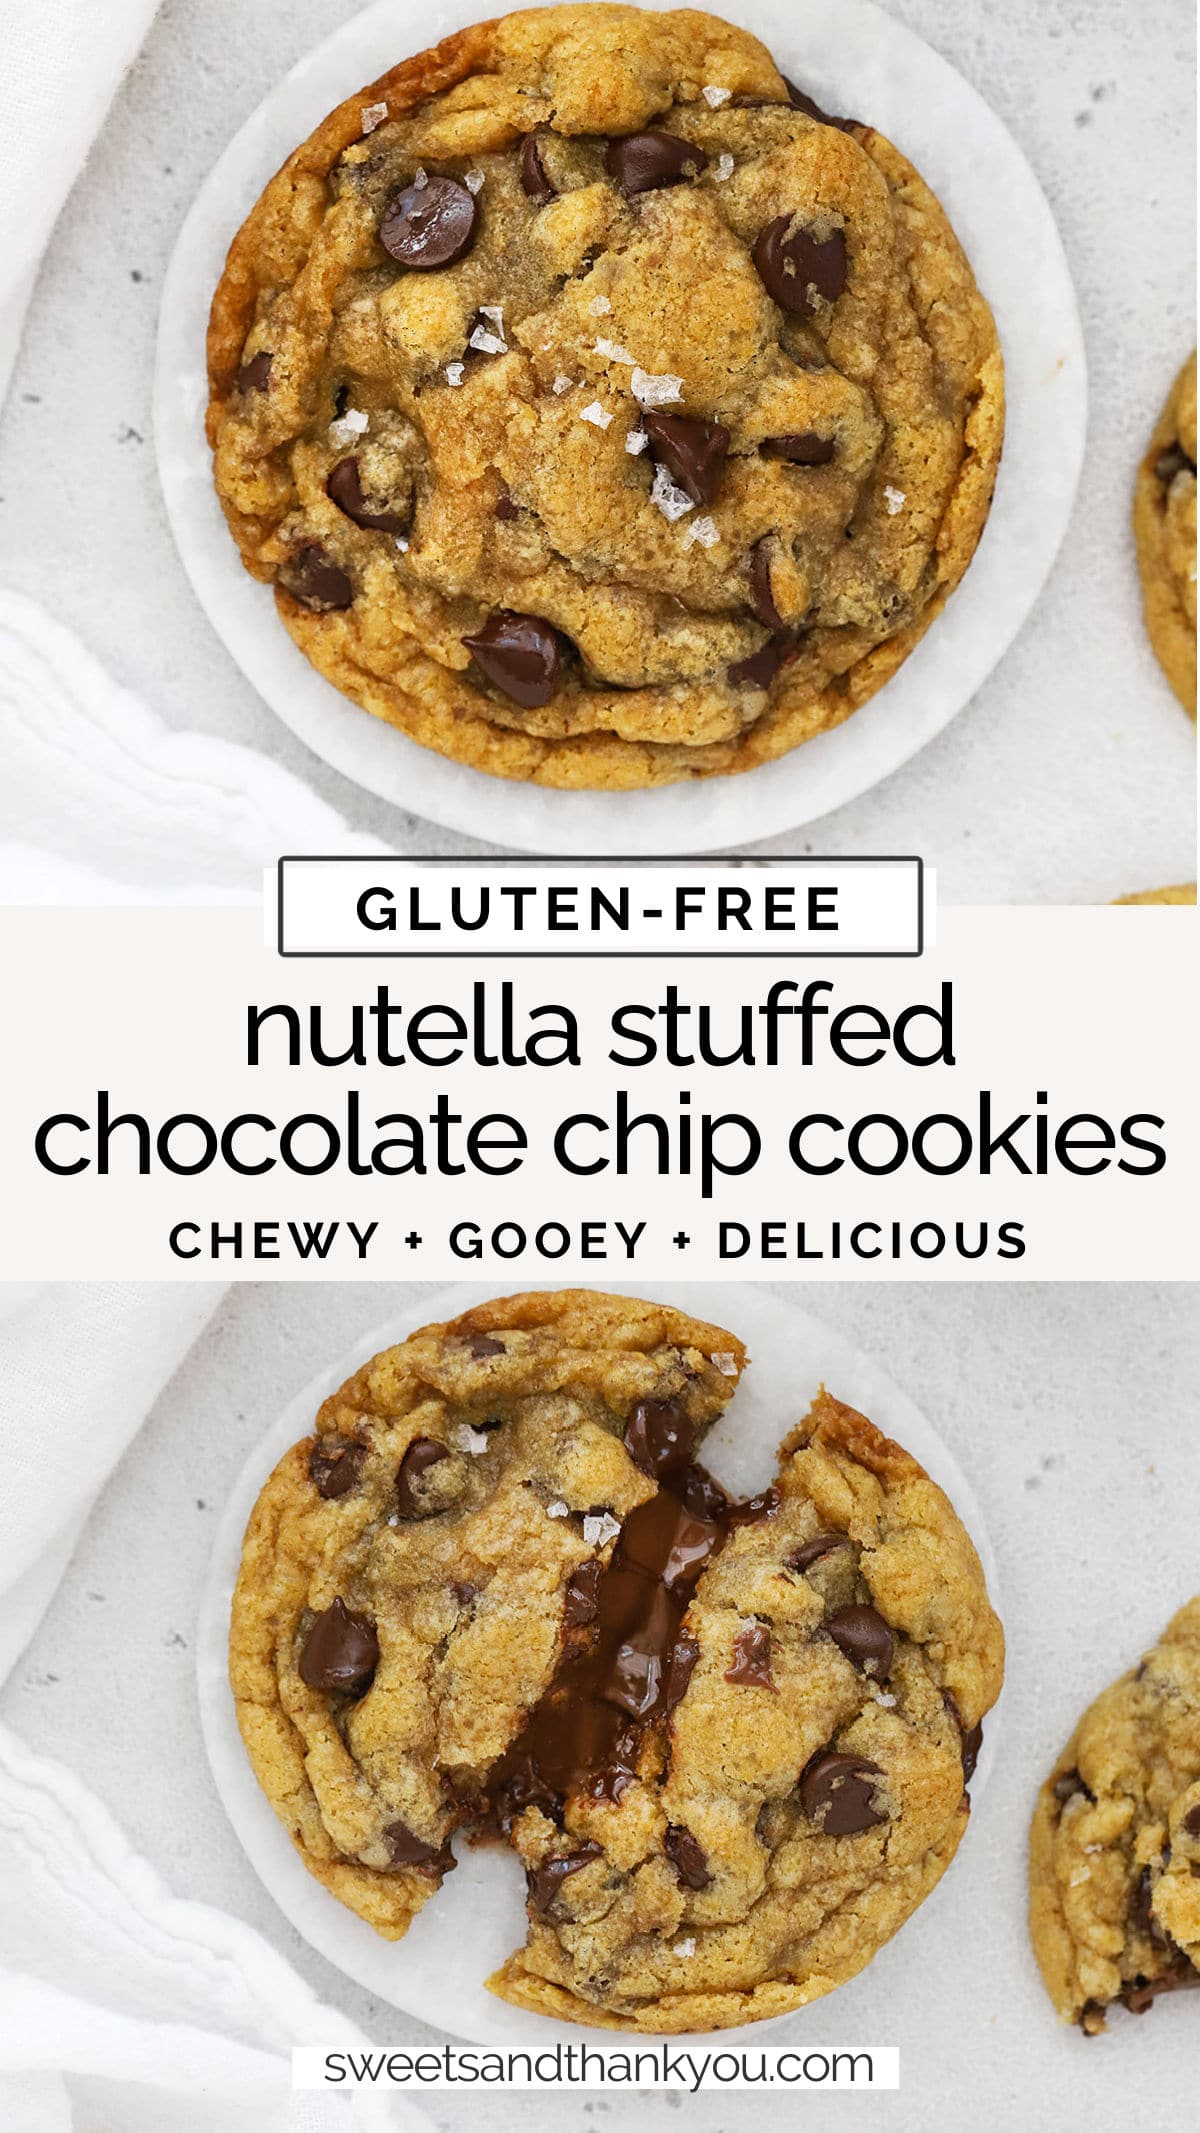 Gluten-Free Nutella-Stuffed Chocolate Chip Cookies. Chewy gluten-free brown butter chocolate chip cookies stuffed with Nutella make for one show-stopping dessert! / gluten-free nutella cookies / nutella-stuffed cookies / gluten-free chocolate chip cookies / gluten-free brown butter chocolate chip cookie recipe / nutella recipes / nutella cookie recipe / gluten-free cookies / gluten-free cookie recipe / gluten-free browned butter chocolate chip cookies / gluten free nutella chocolate chip cookies